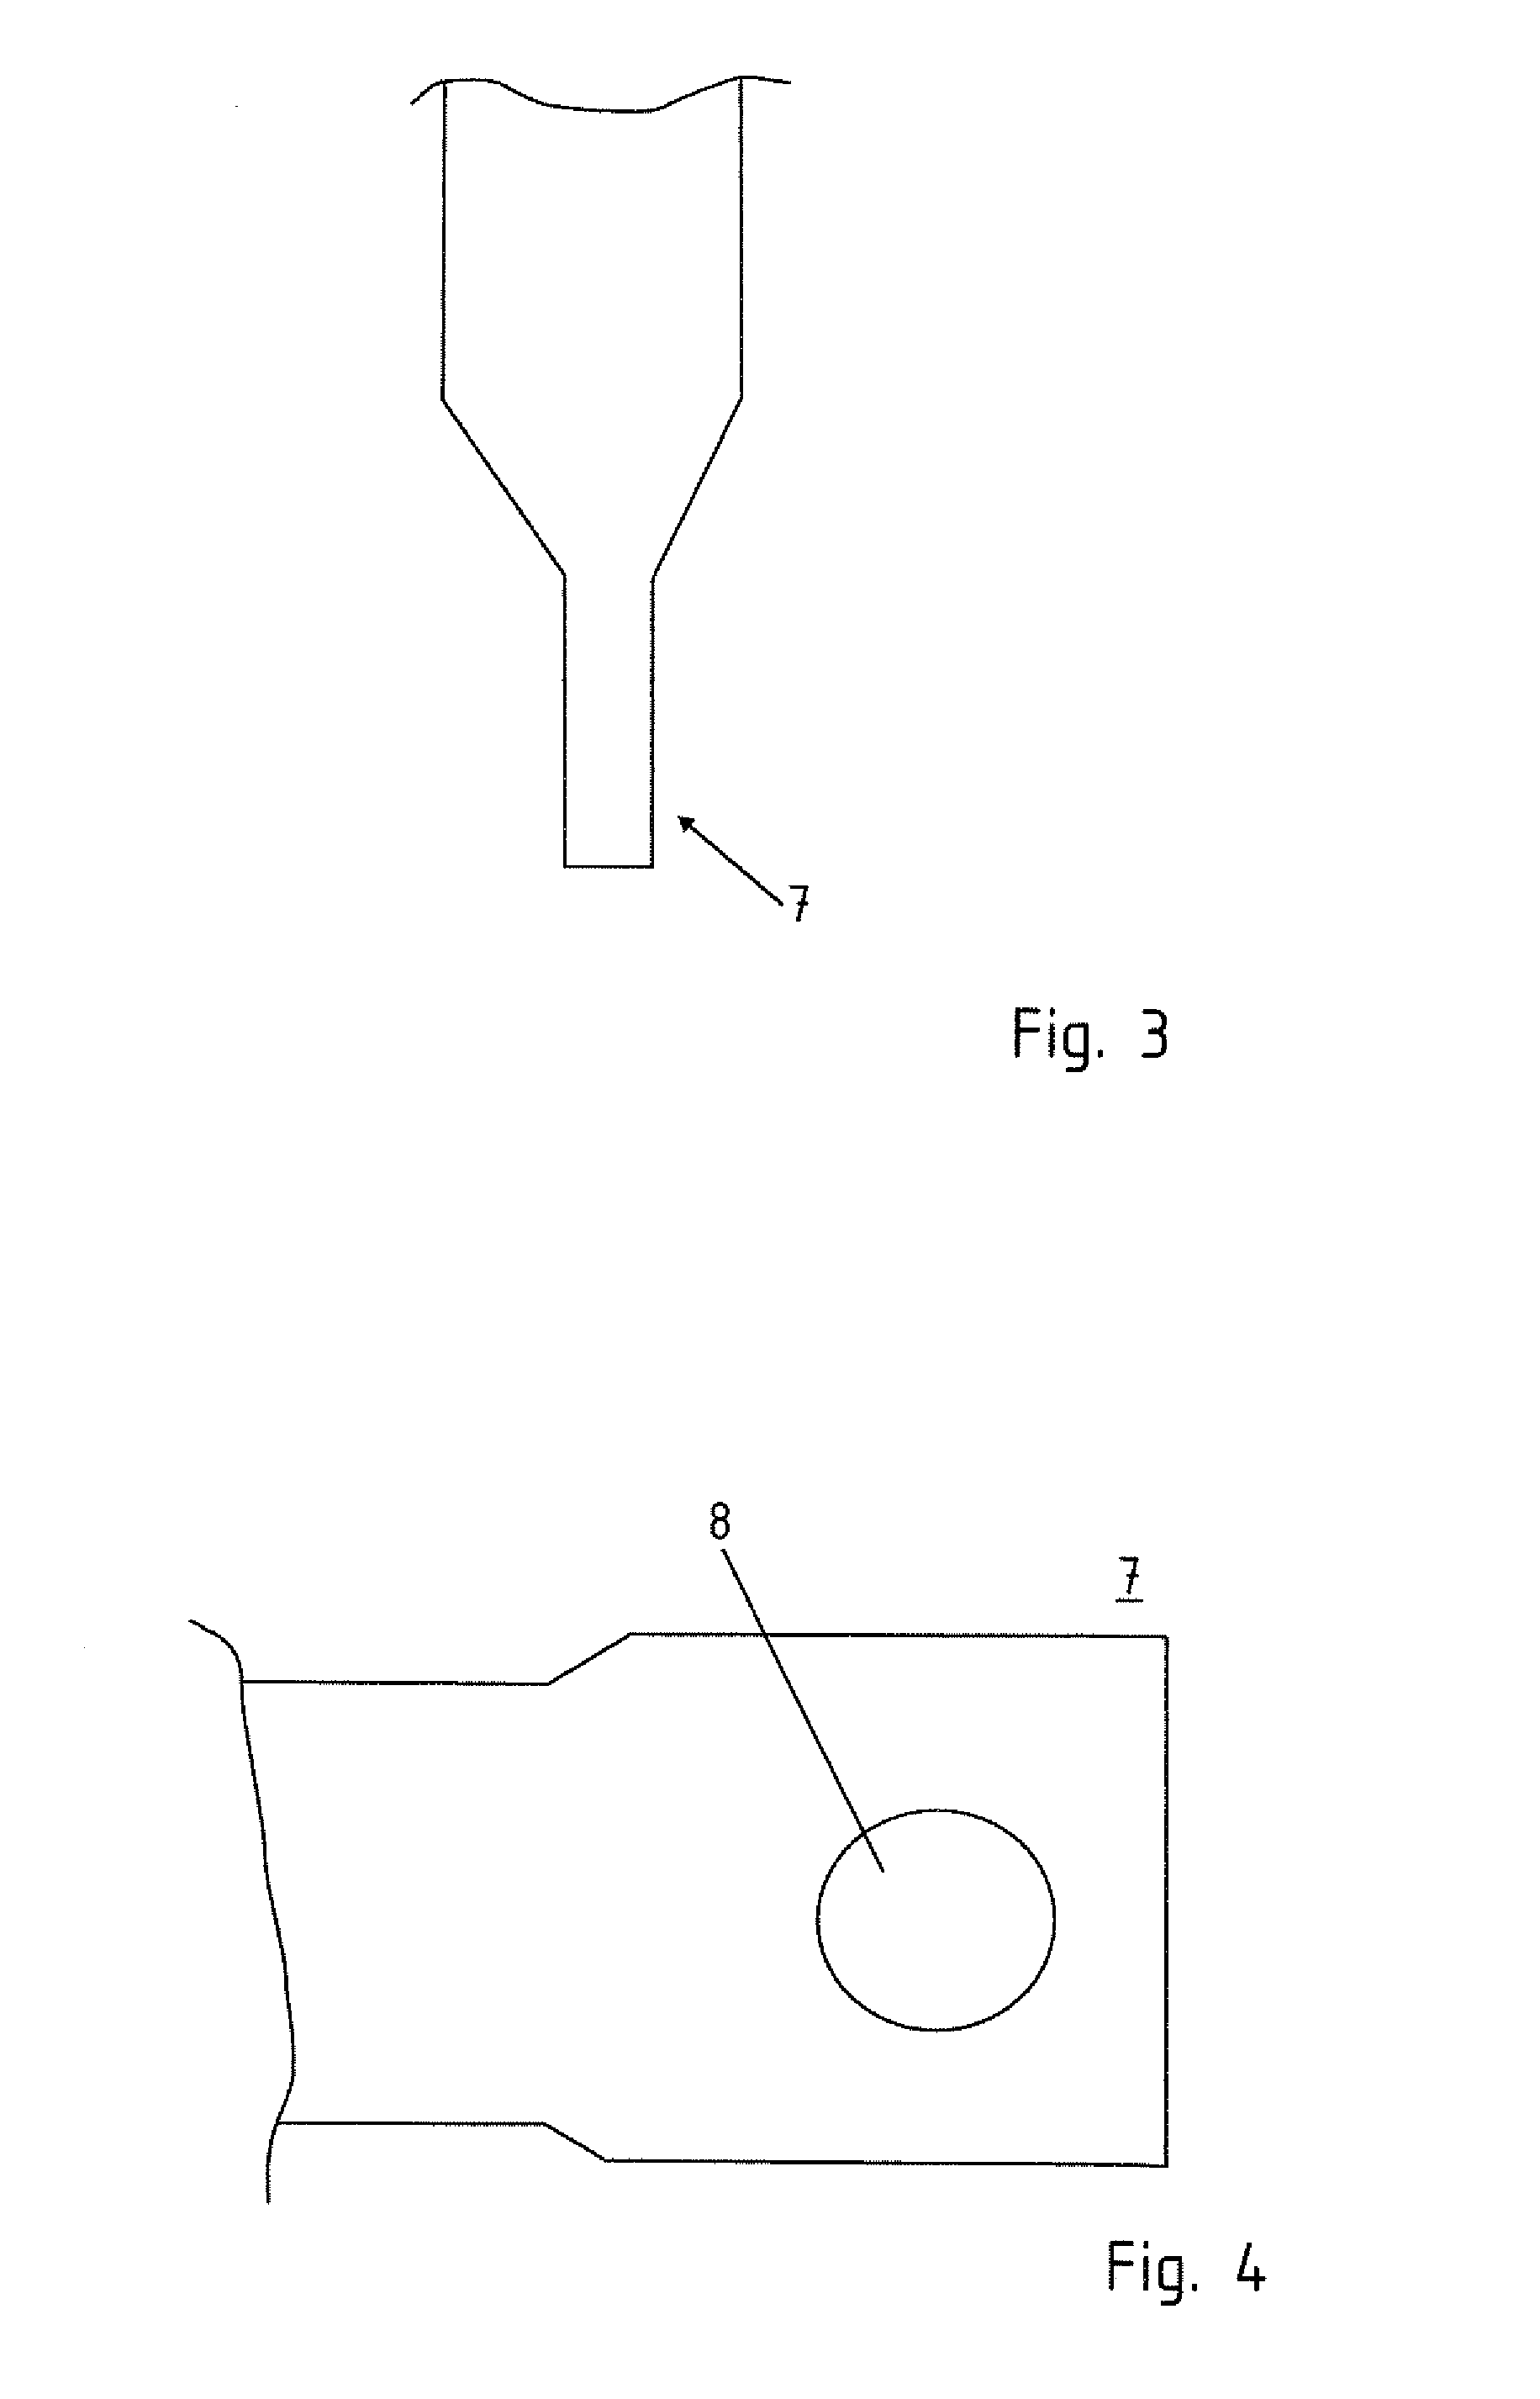 Method for producing a motor vehicle stabilizer